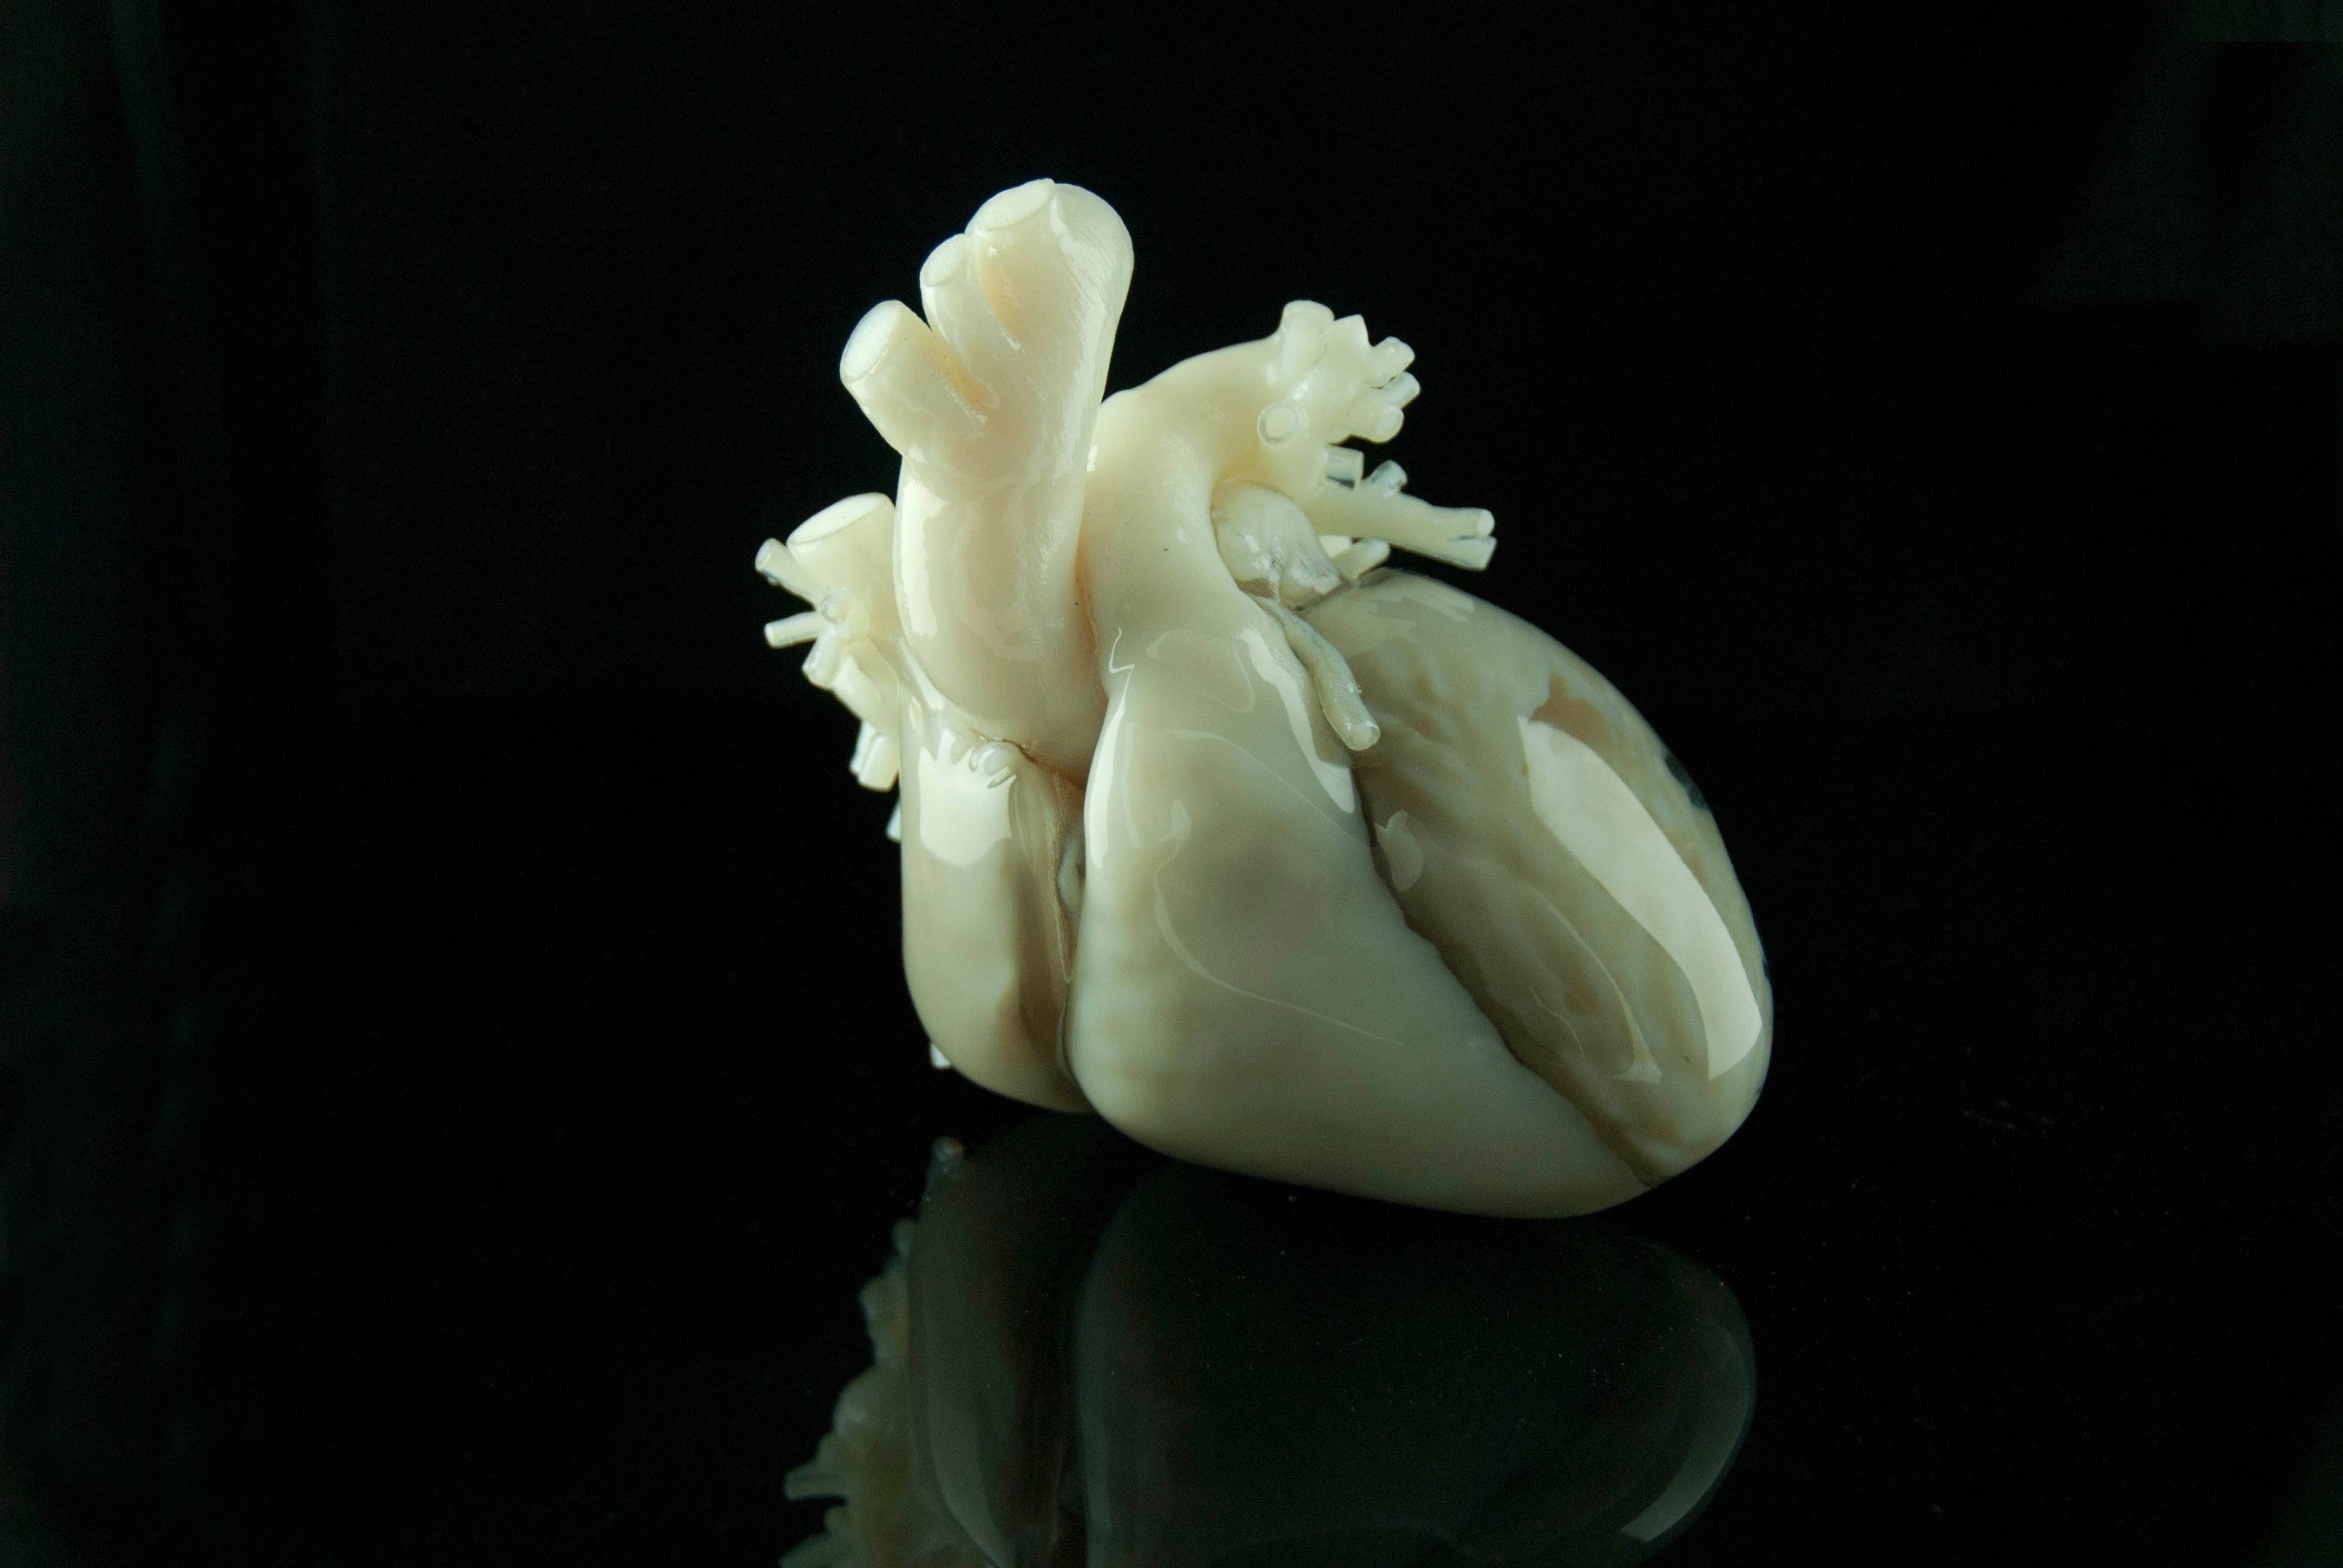 Materialise Mimics inPrint enables surgeons to create accurate medical models for 3D printing.